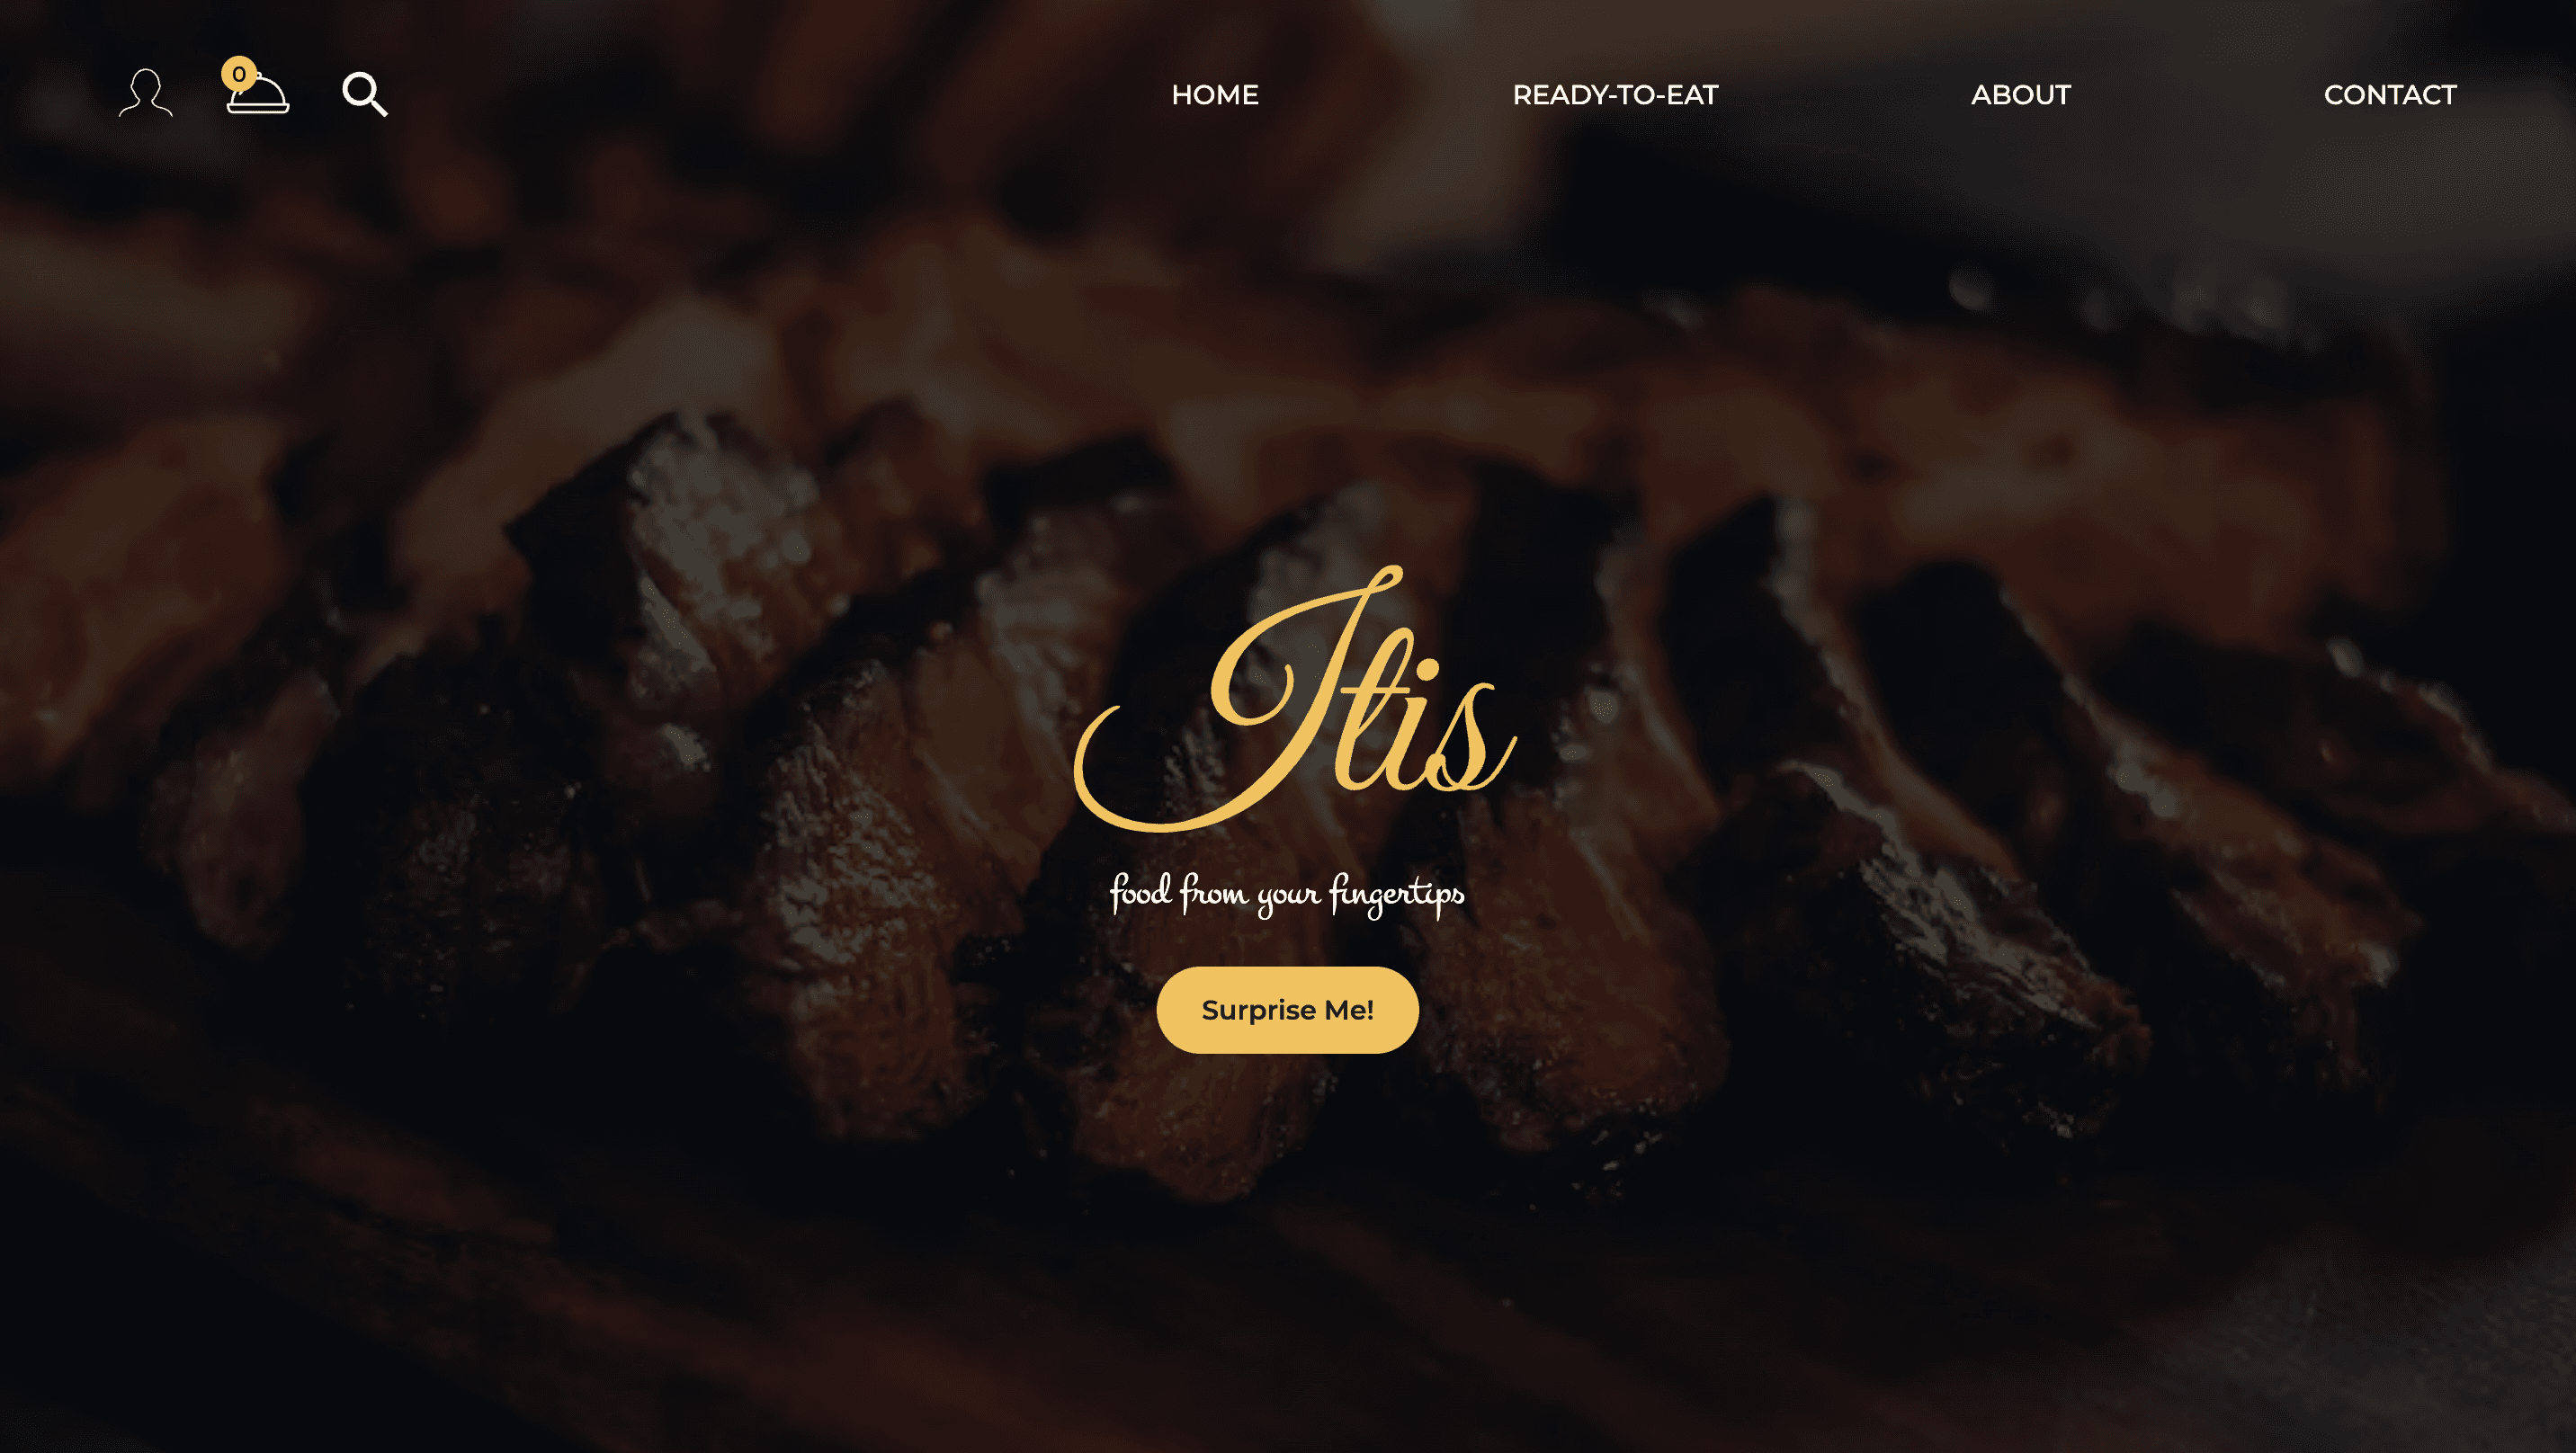 An image of the Itis project.